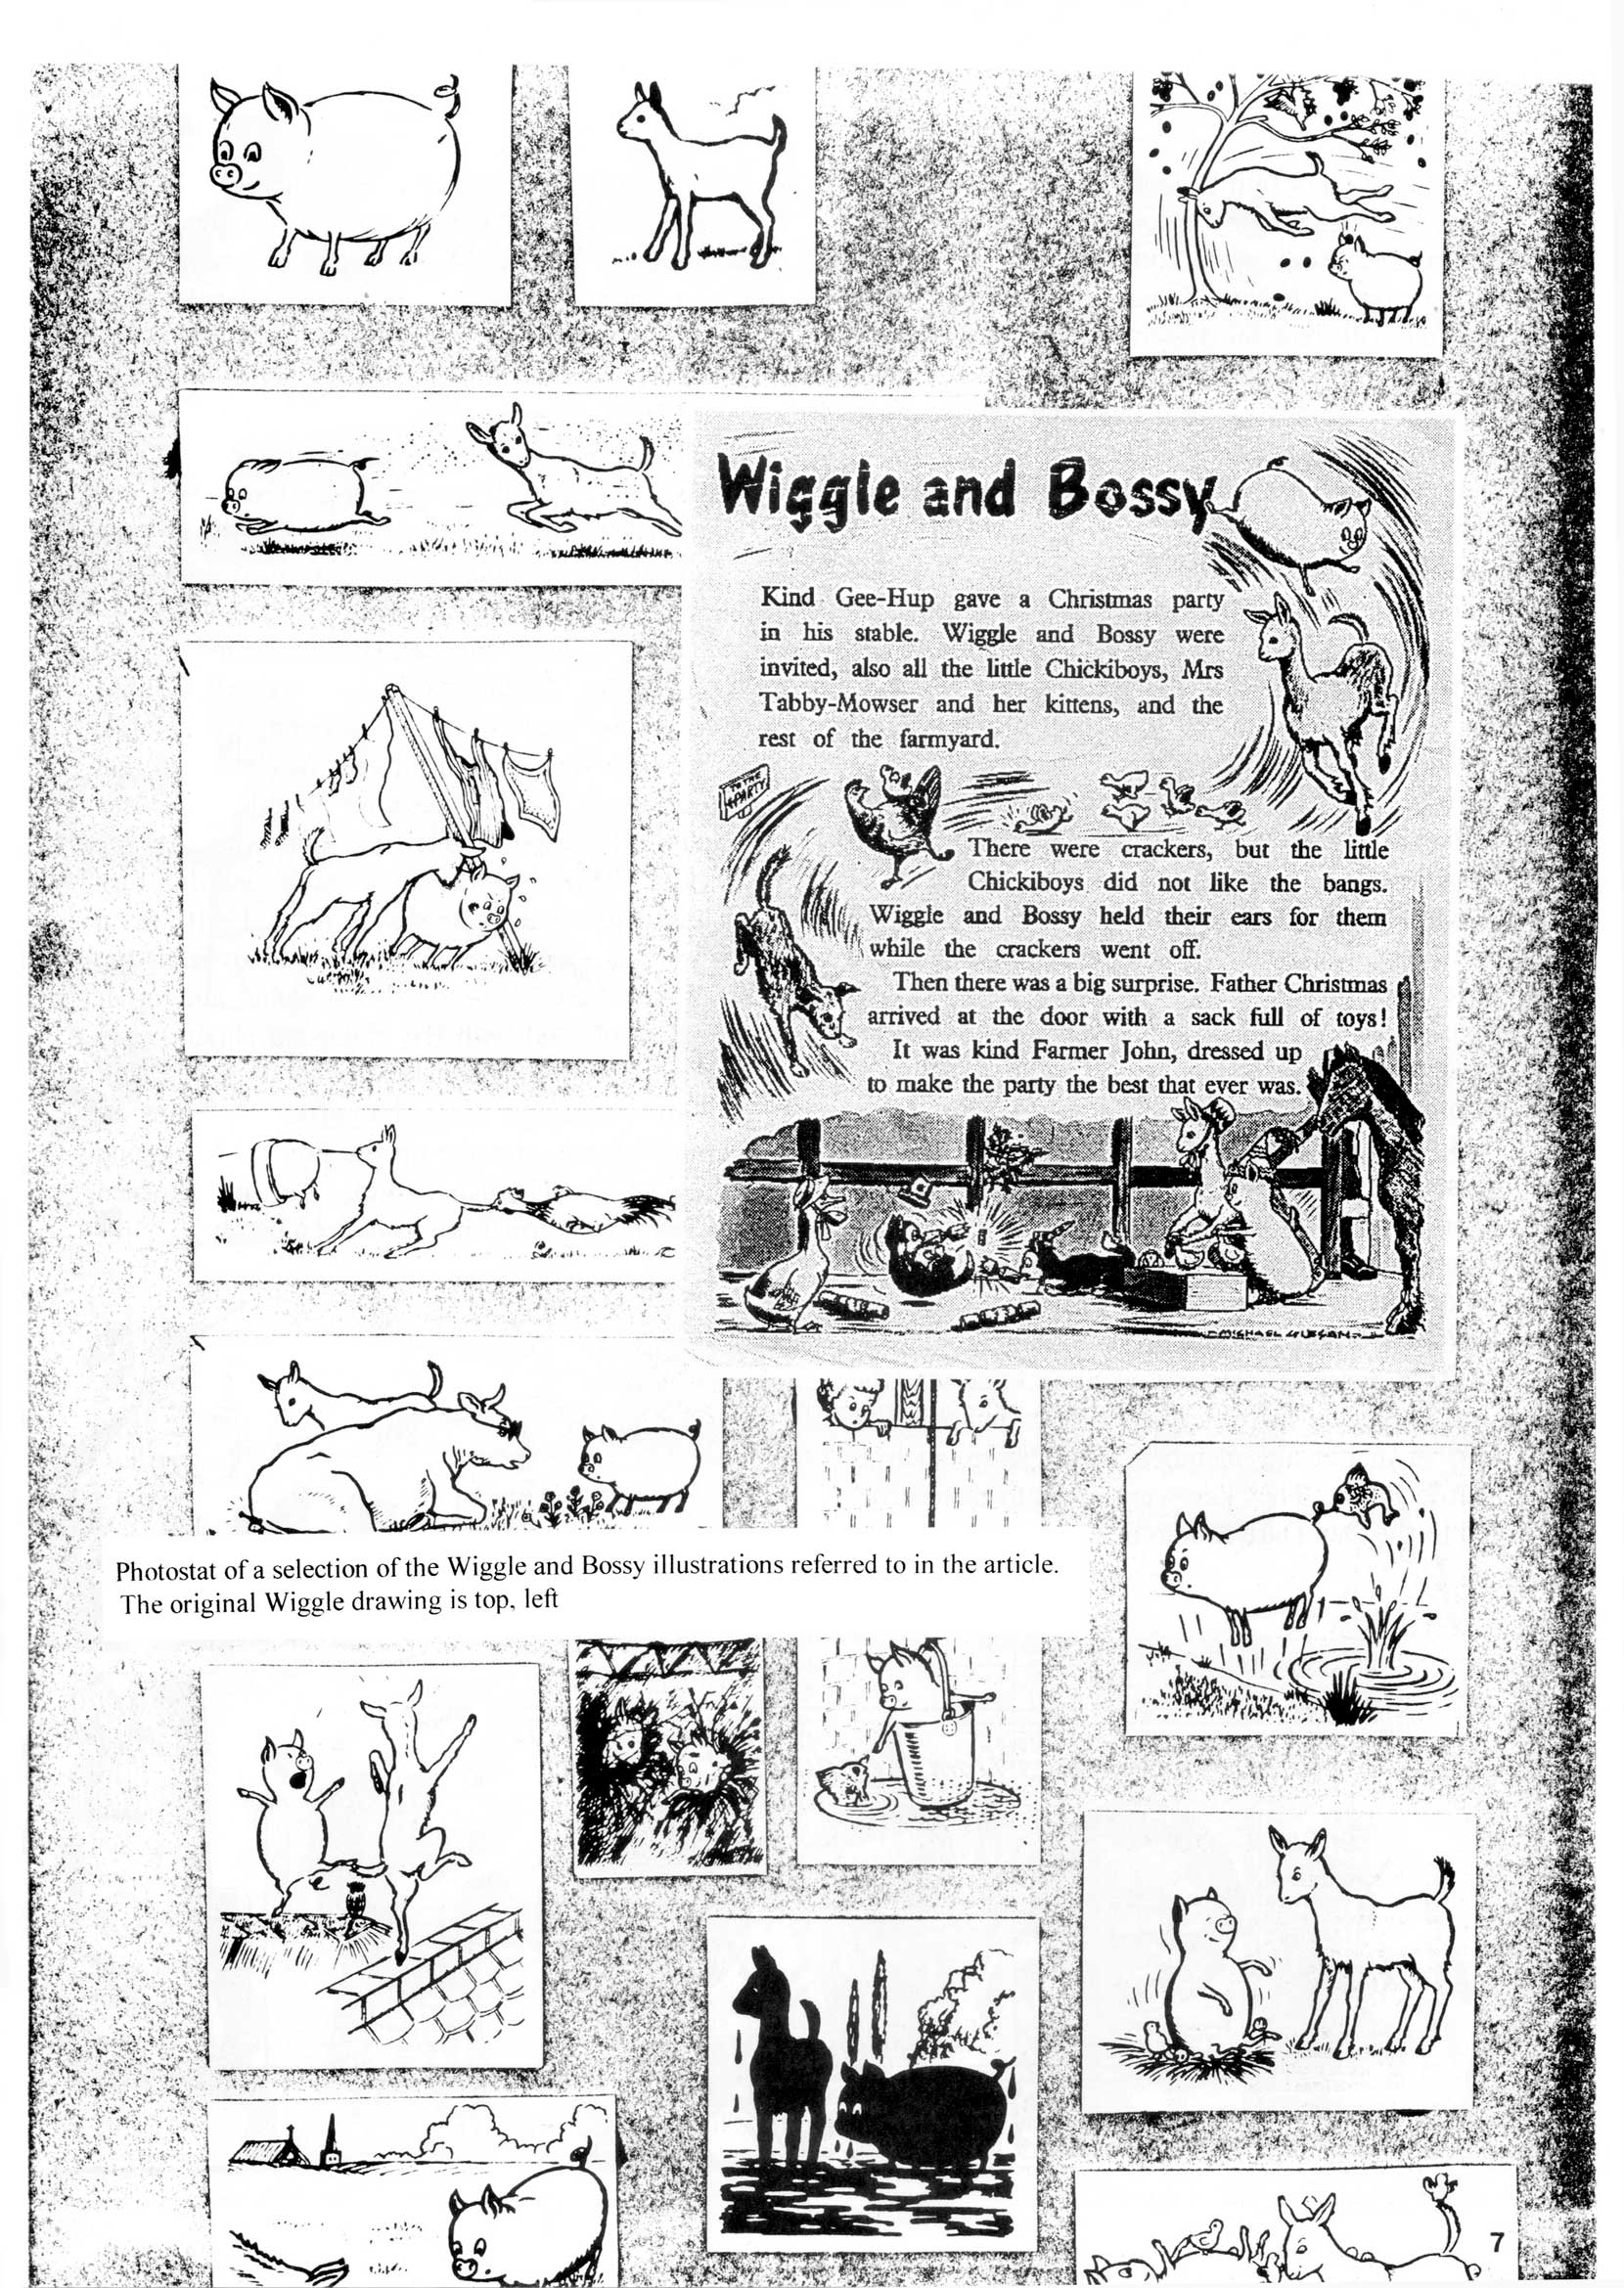 Eagle art editor page 5: illustrations for Wiggle and Bossy